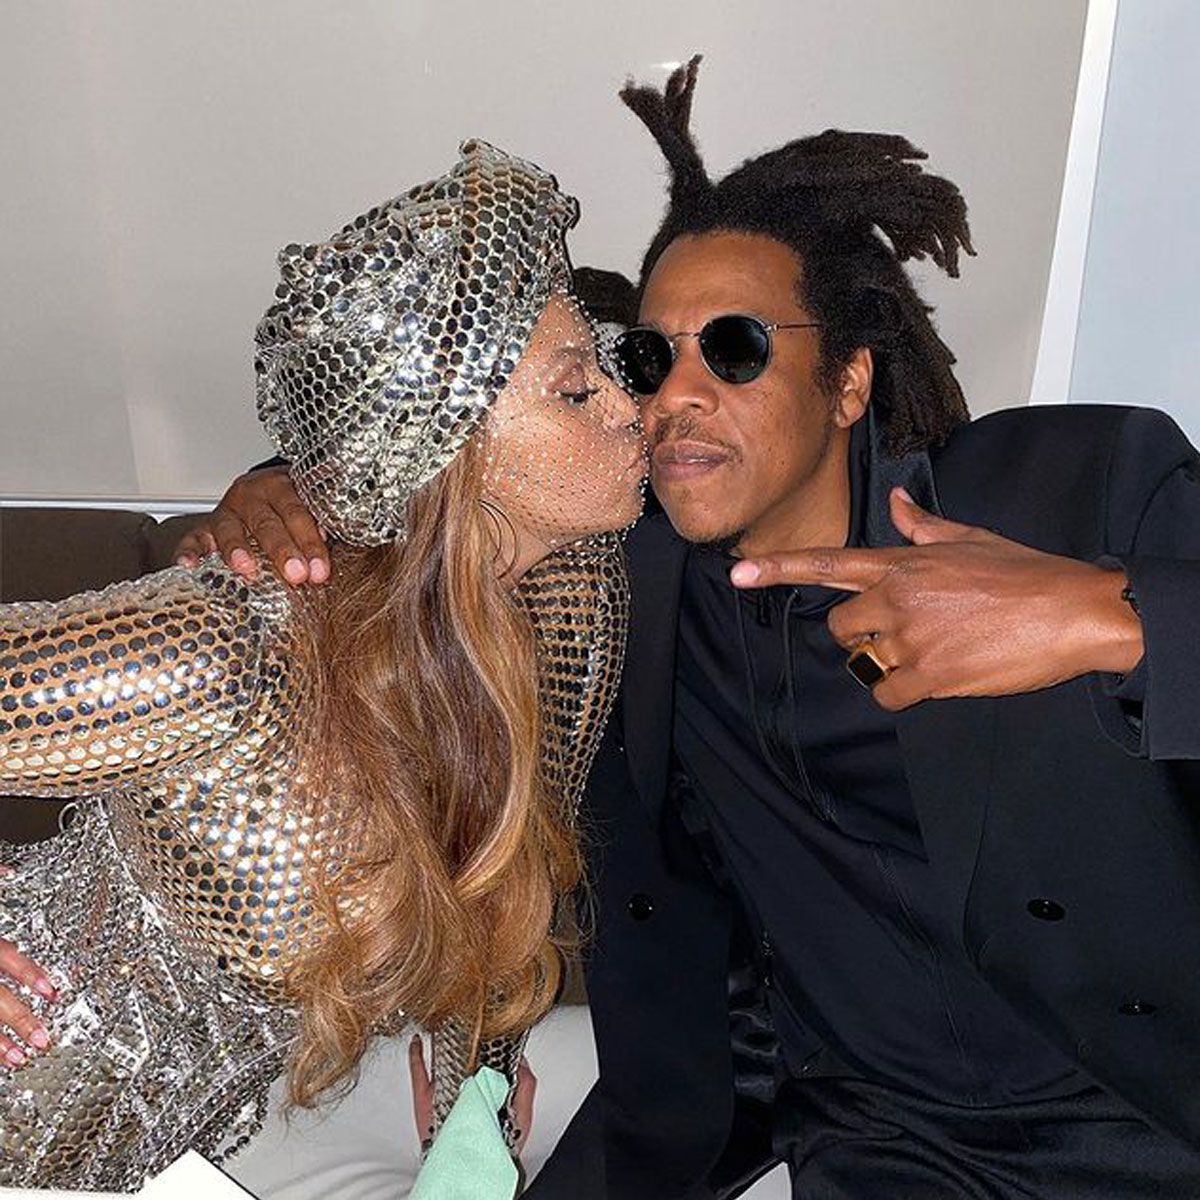 Beyoncé and JayZ Prove They're Still Crazy in Love in PDA Photos